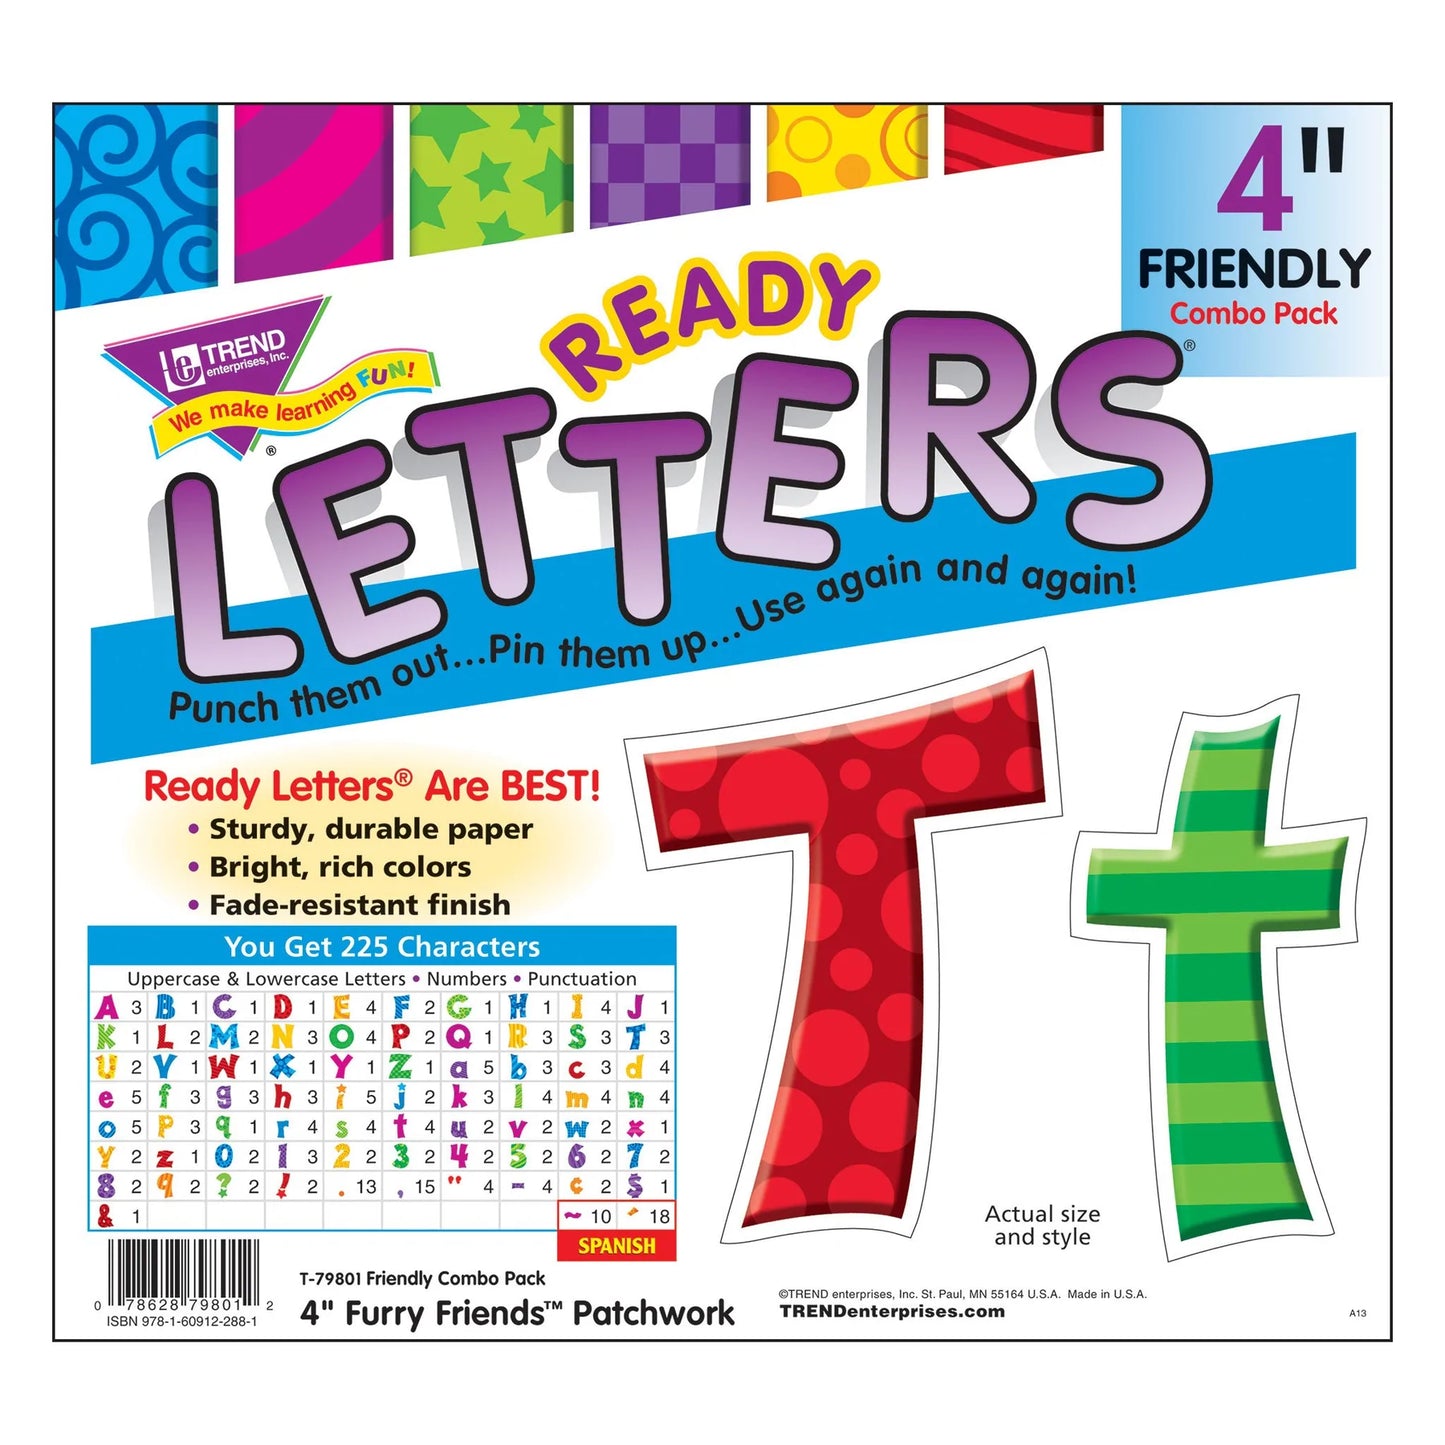 Patchwork Furry Friends® 4-Inch Friendly Uppercase/Lowercase Combo Pack